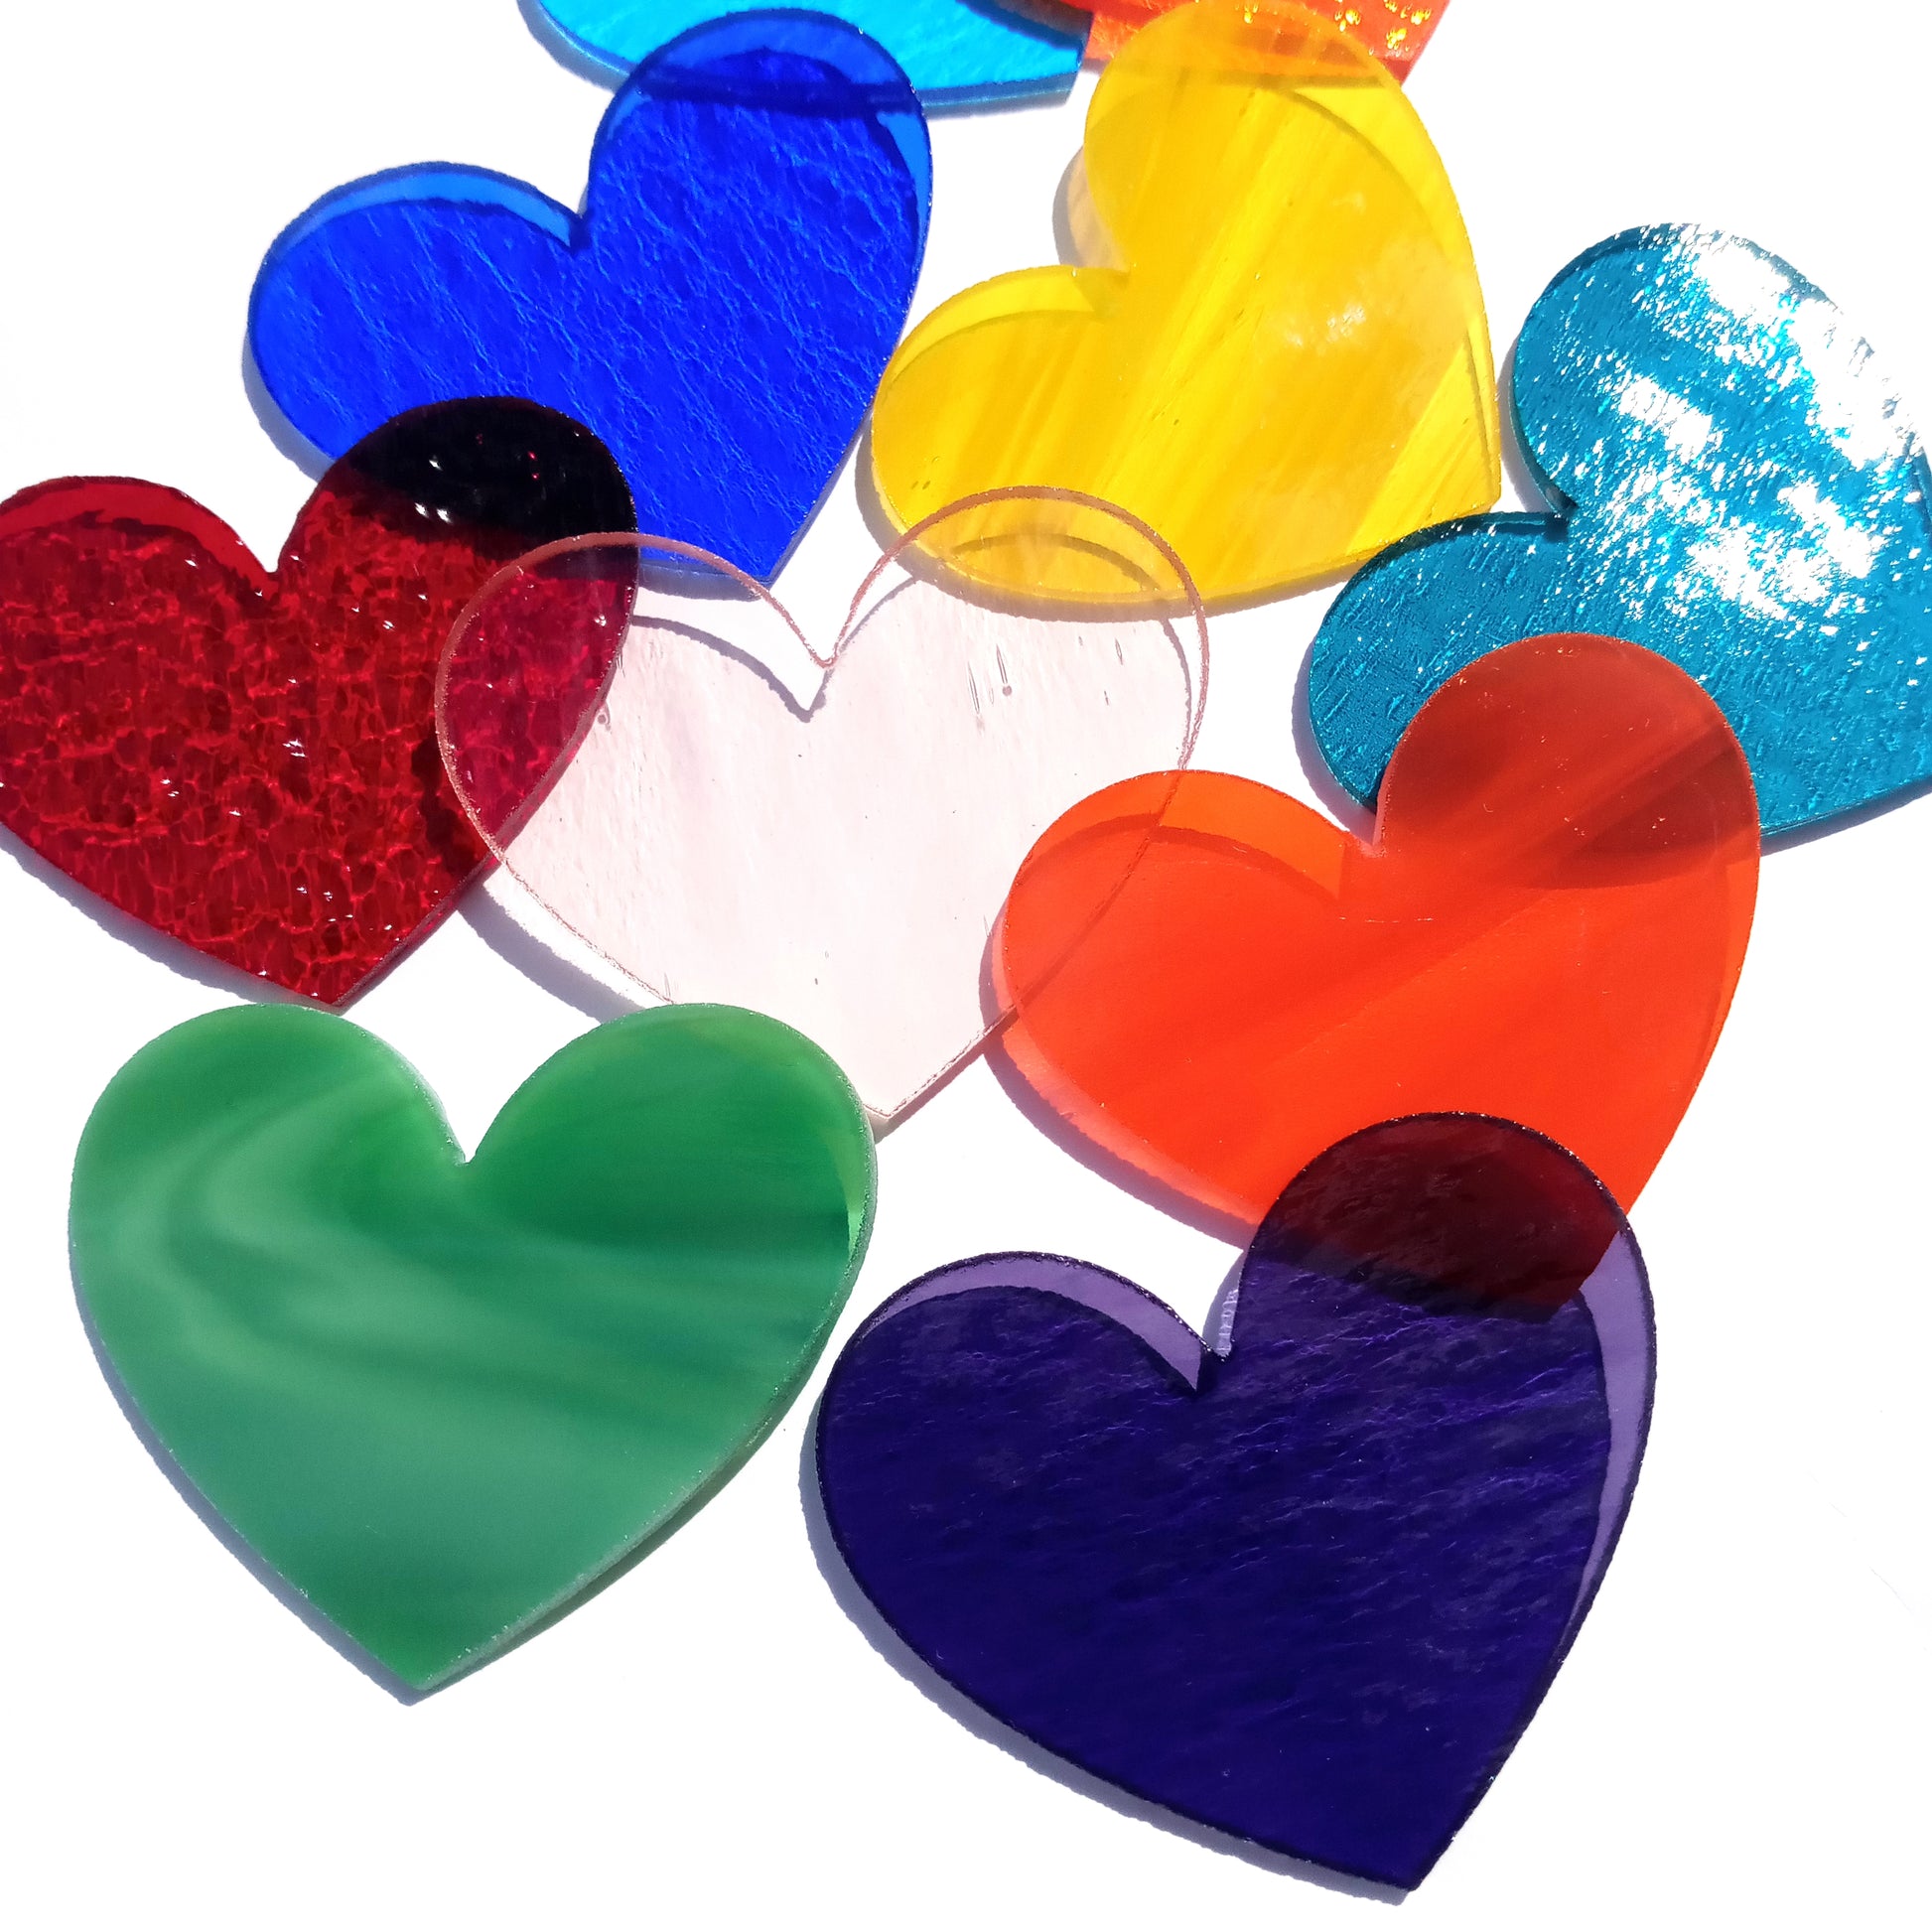 Precut Stained Glass Hearts, Assorted Colors, 2.5" Glass Hearts for Mosaics, Jewelry, Stained Glass